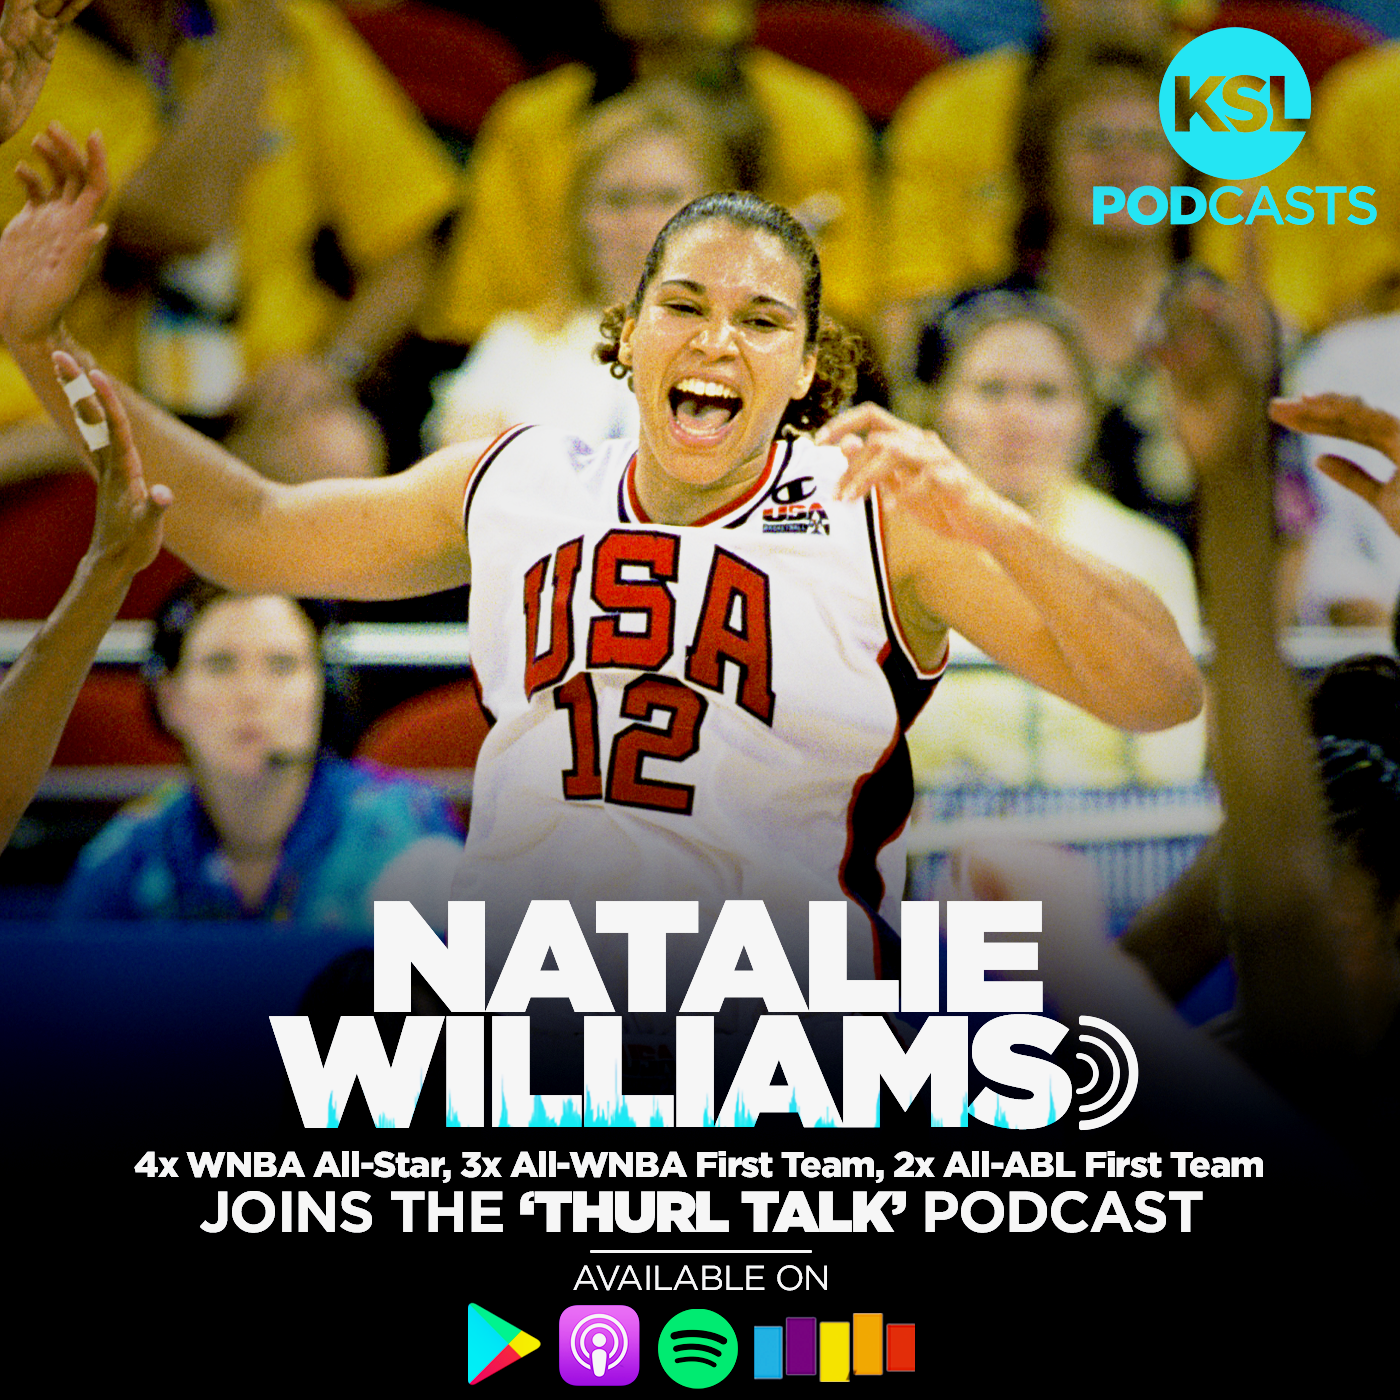 Natalie Williams on being drafted by the Utah Starzz, inequalities between the NBA and the WNBA, and her passion for coaching